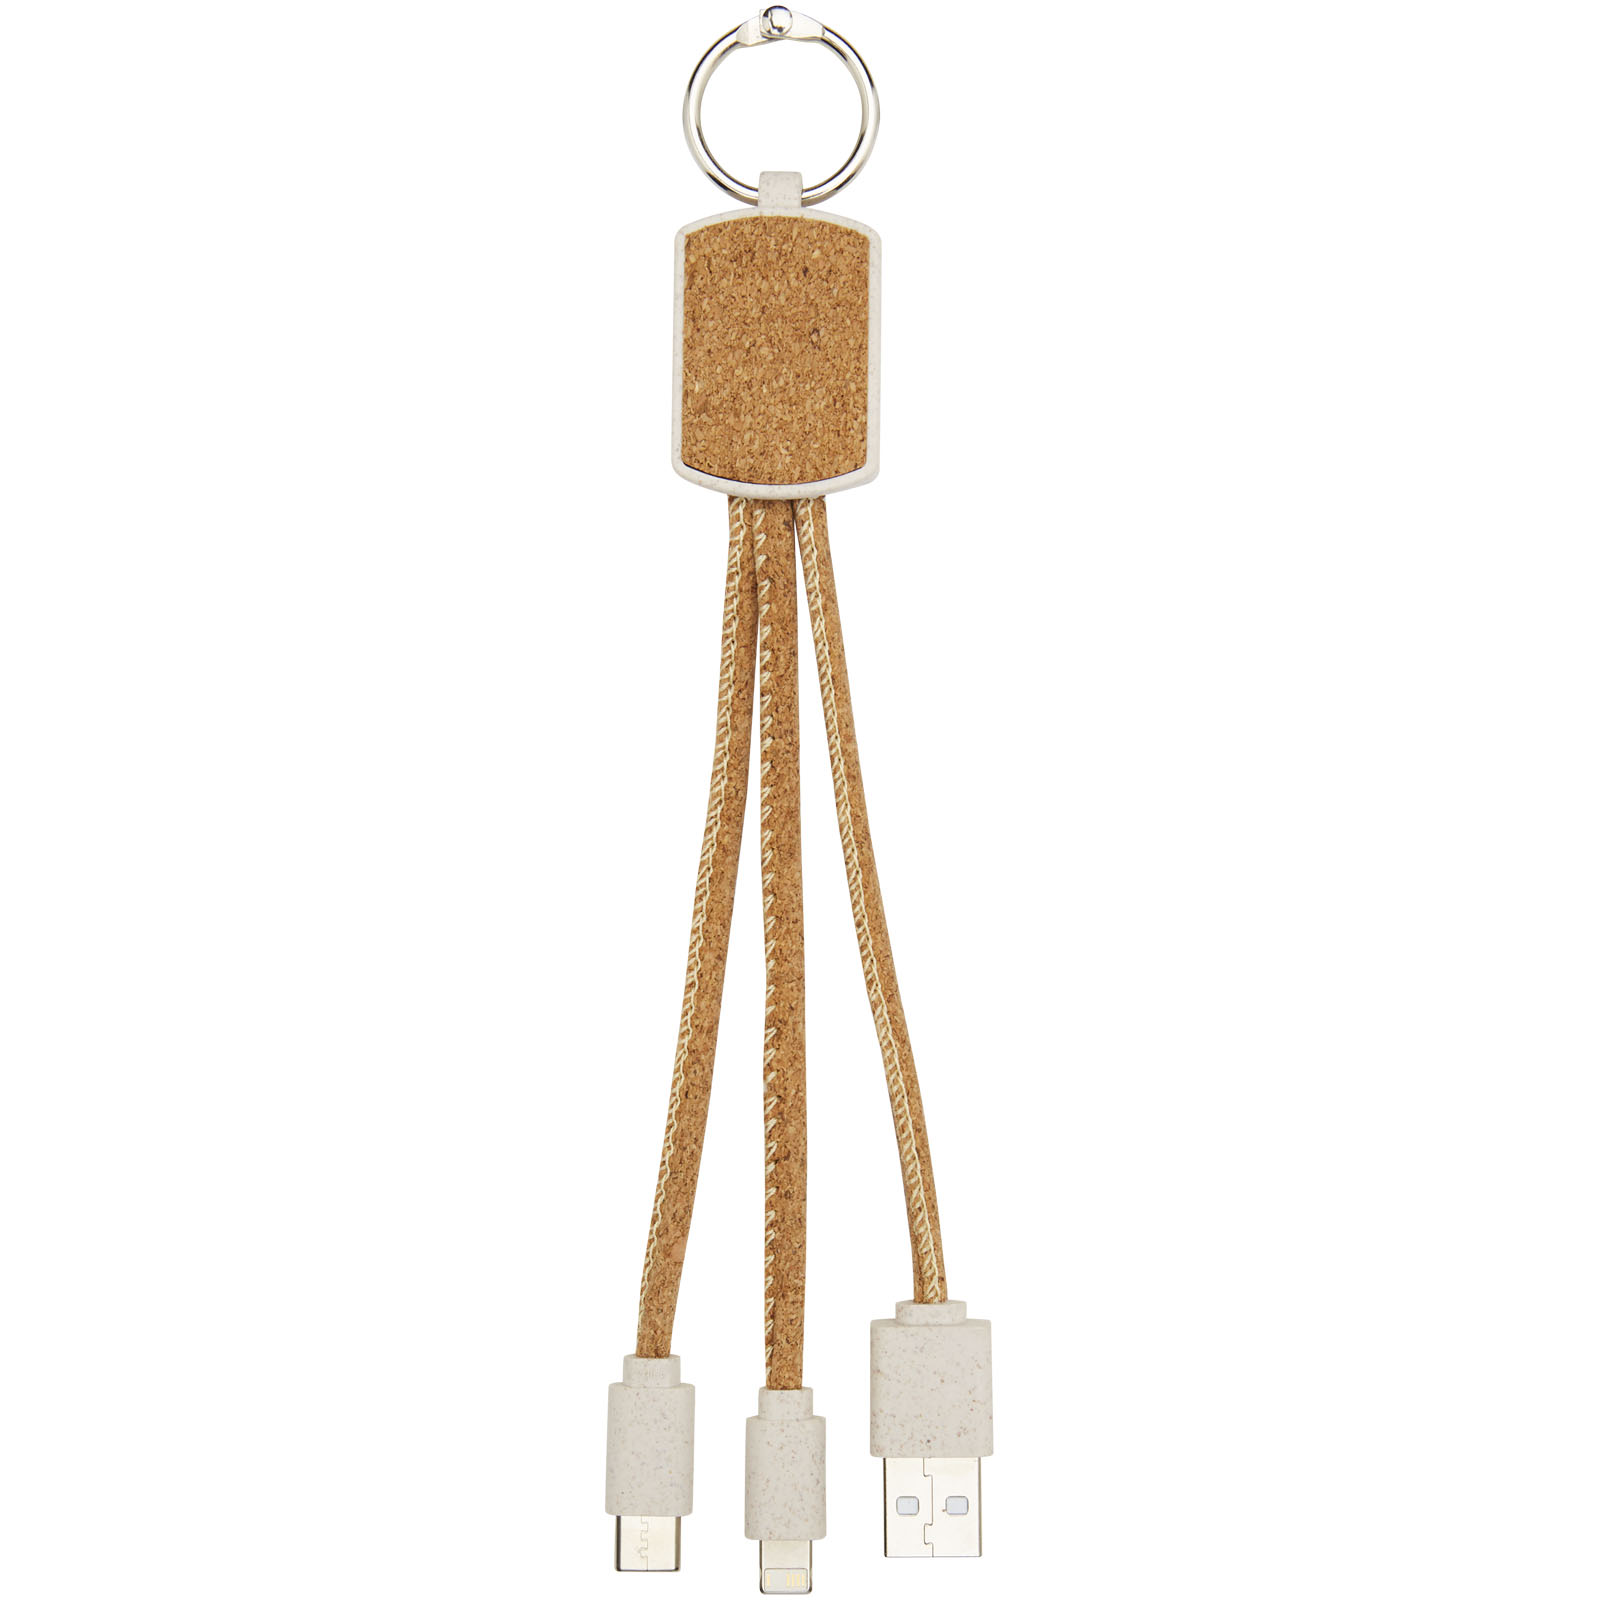 Advertising Cables - Bates wheat straw and cork 3-in-1 charging cable - 2